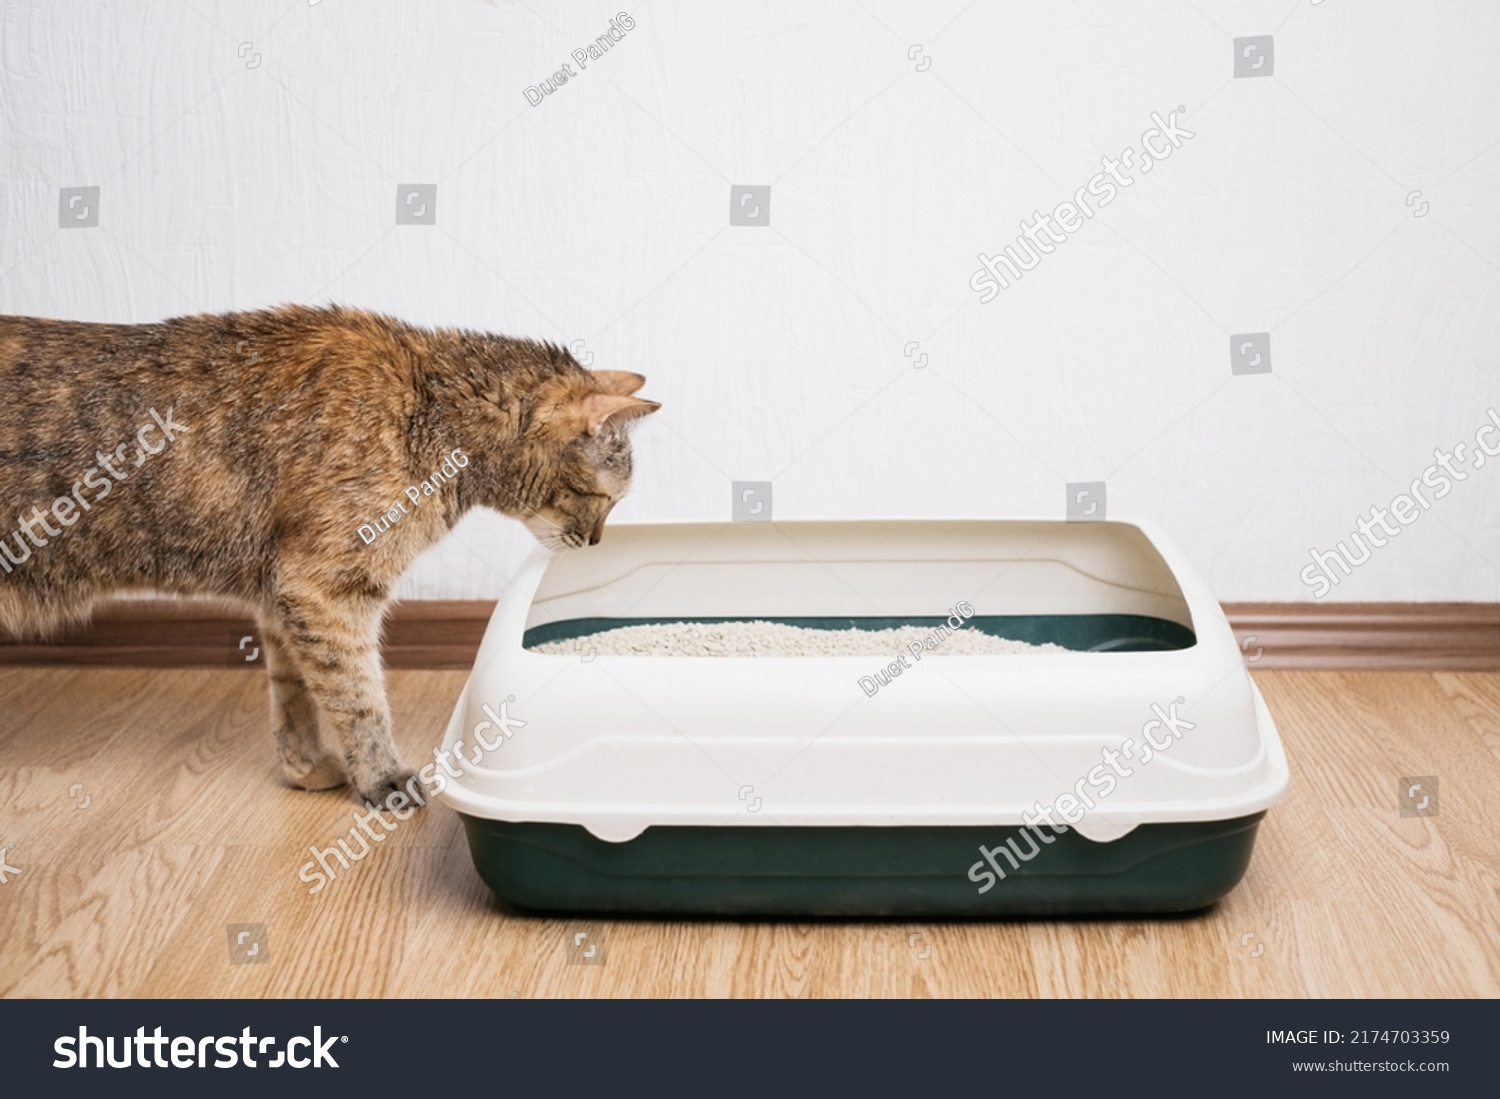 Domestic ginger cat looking at litter box. Hygiene for pets. #2174703359